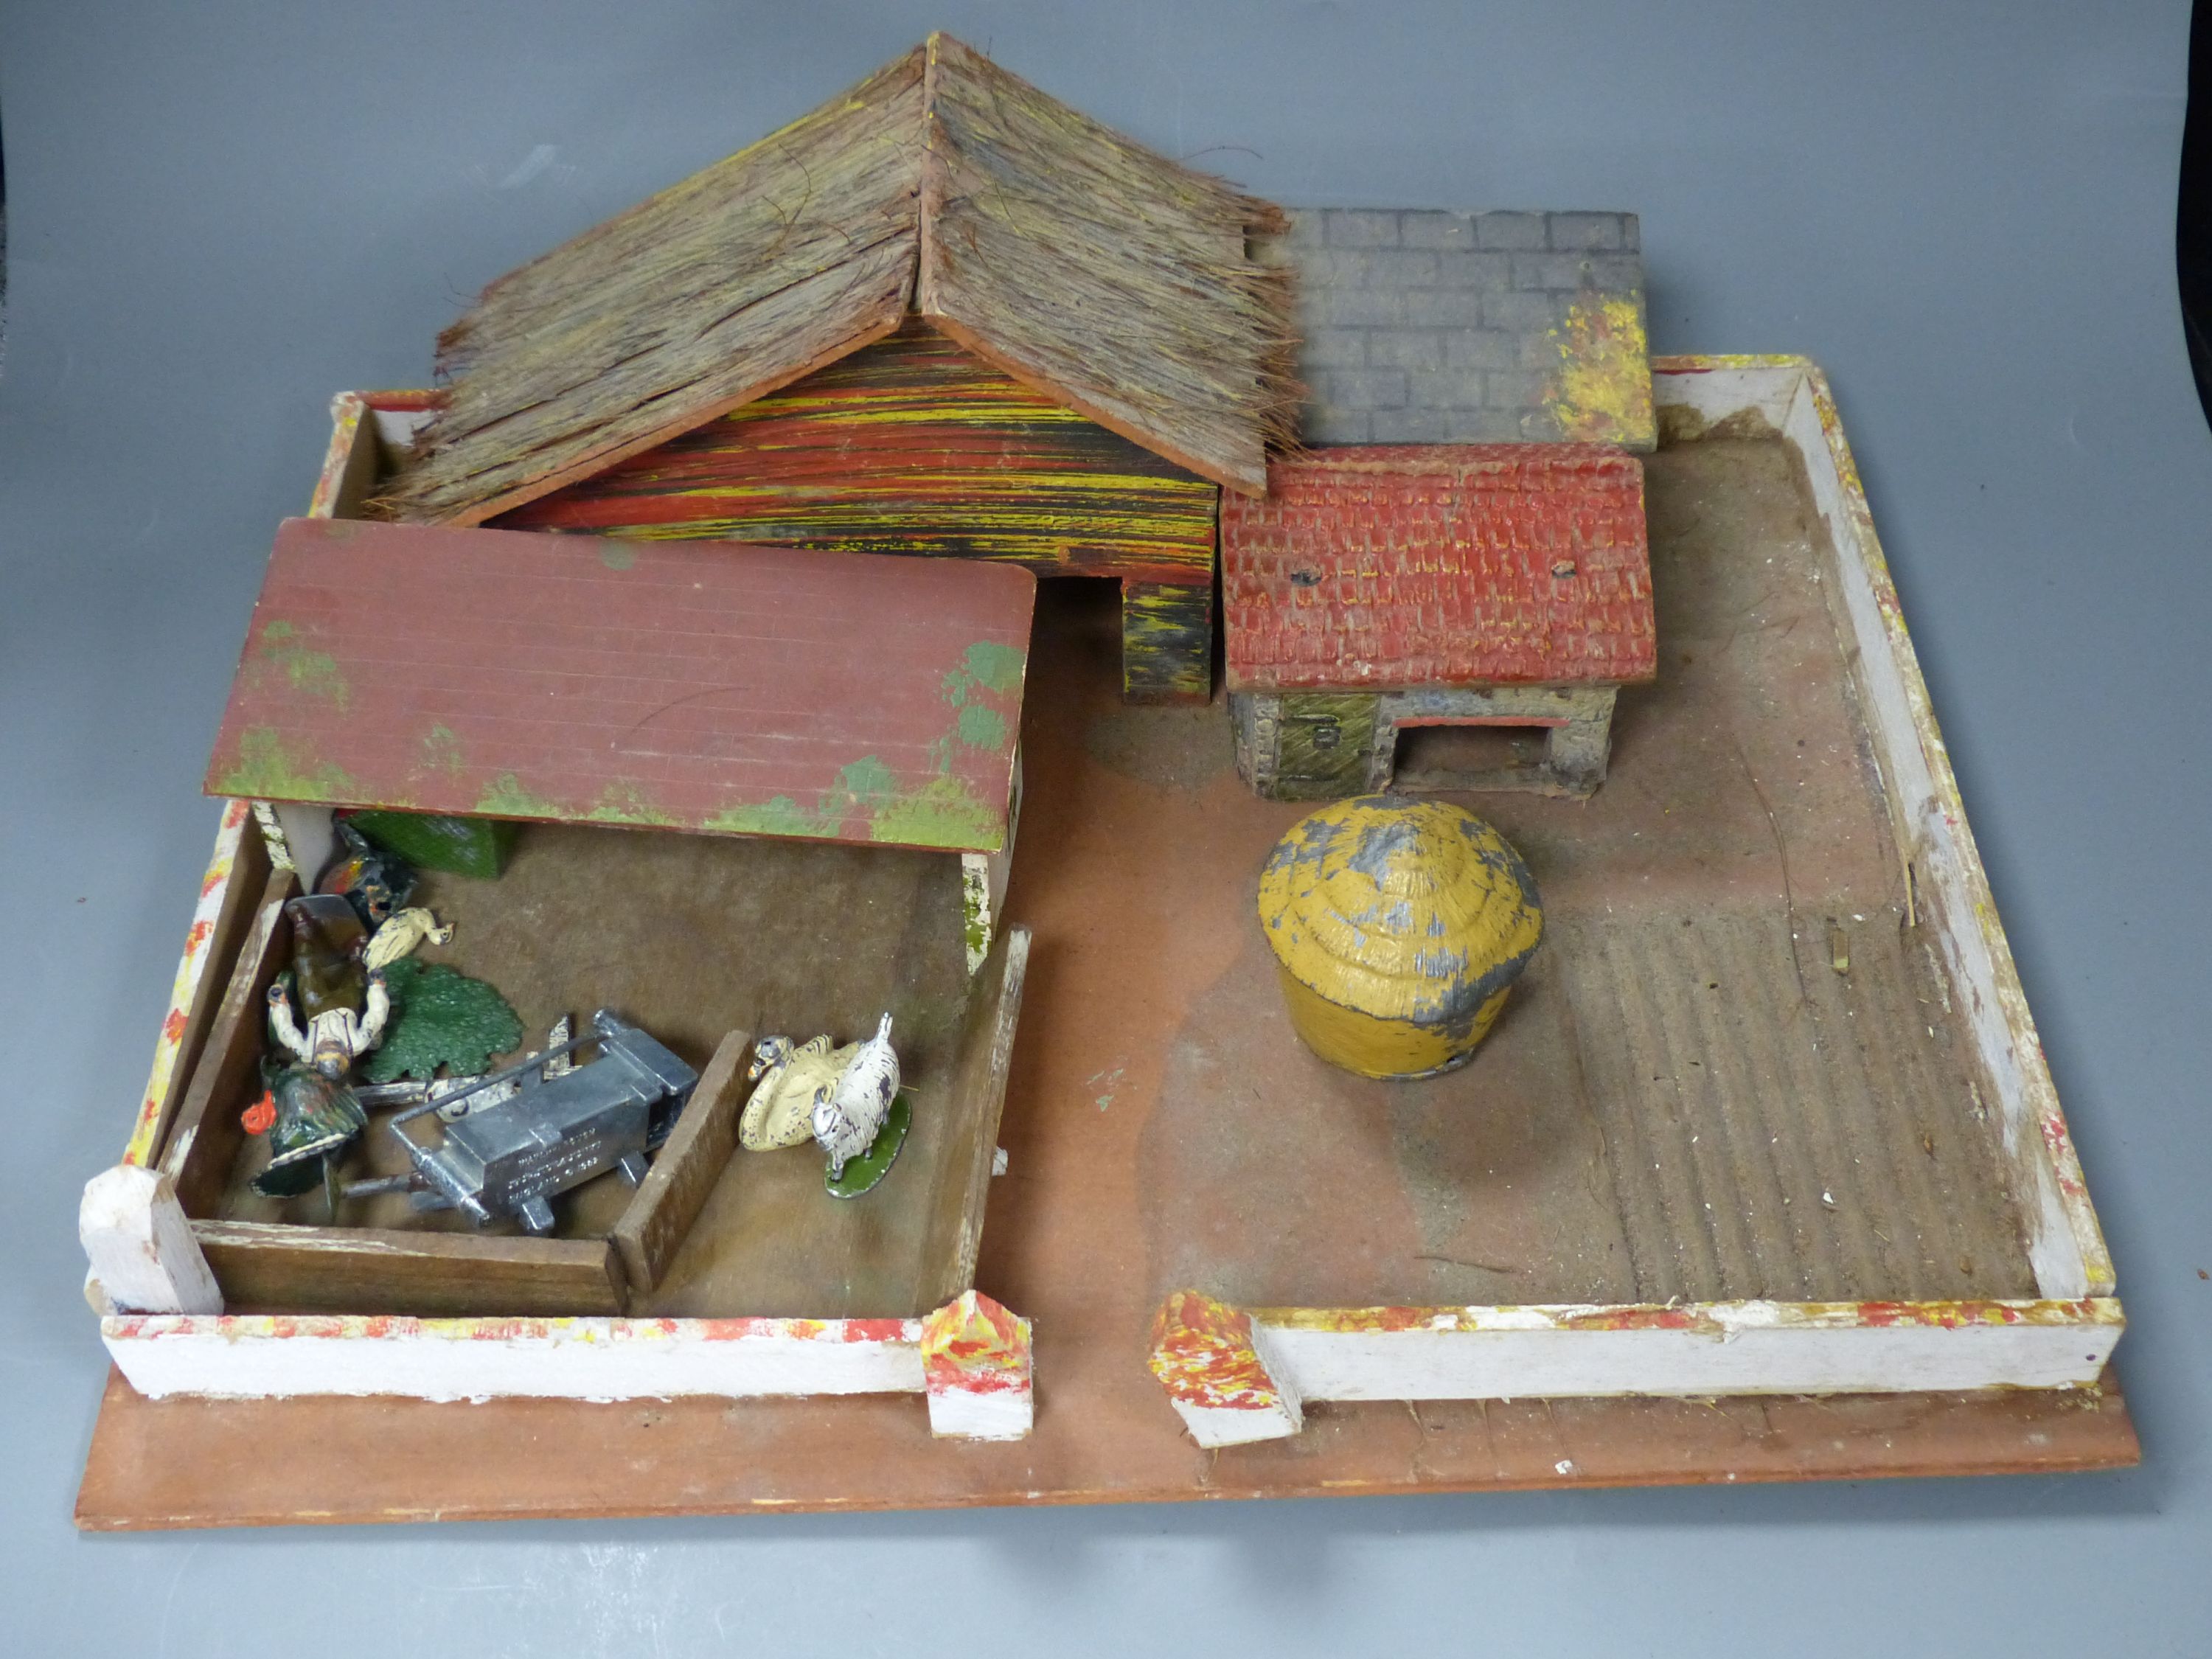 A model farmhouse and a small quantity of lead figures